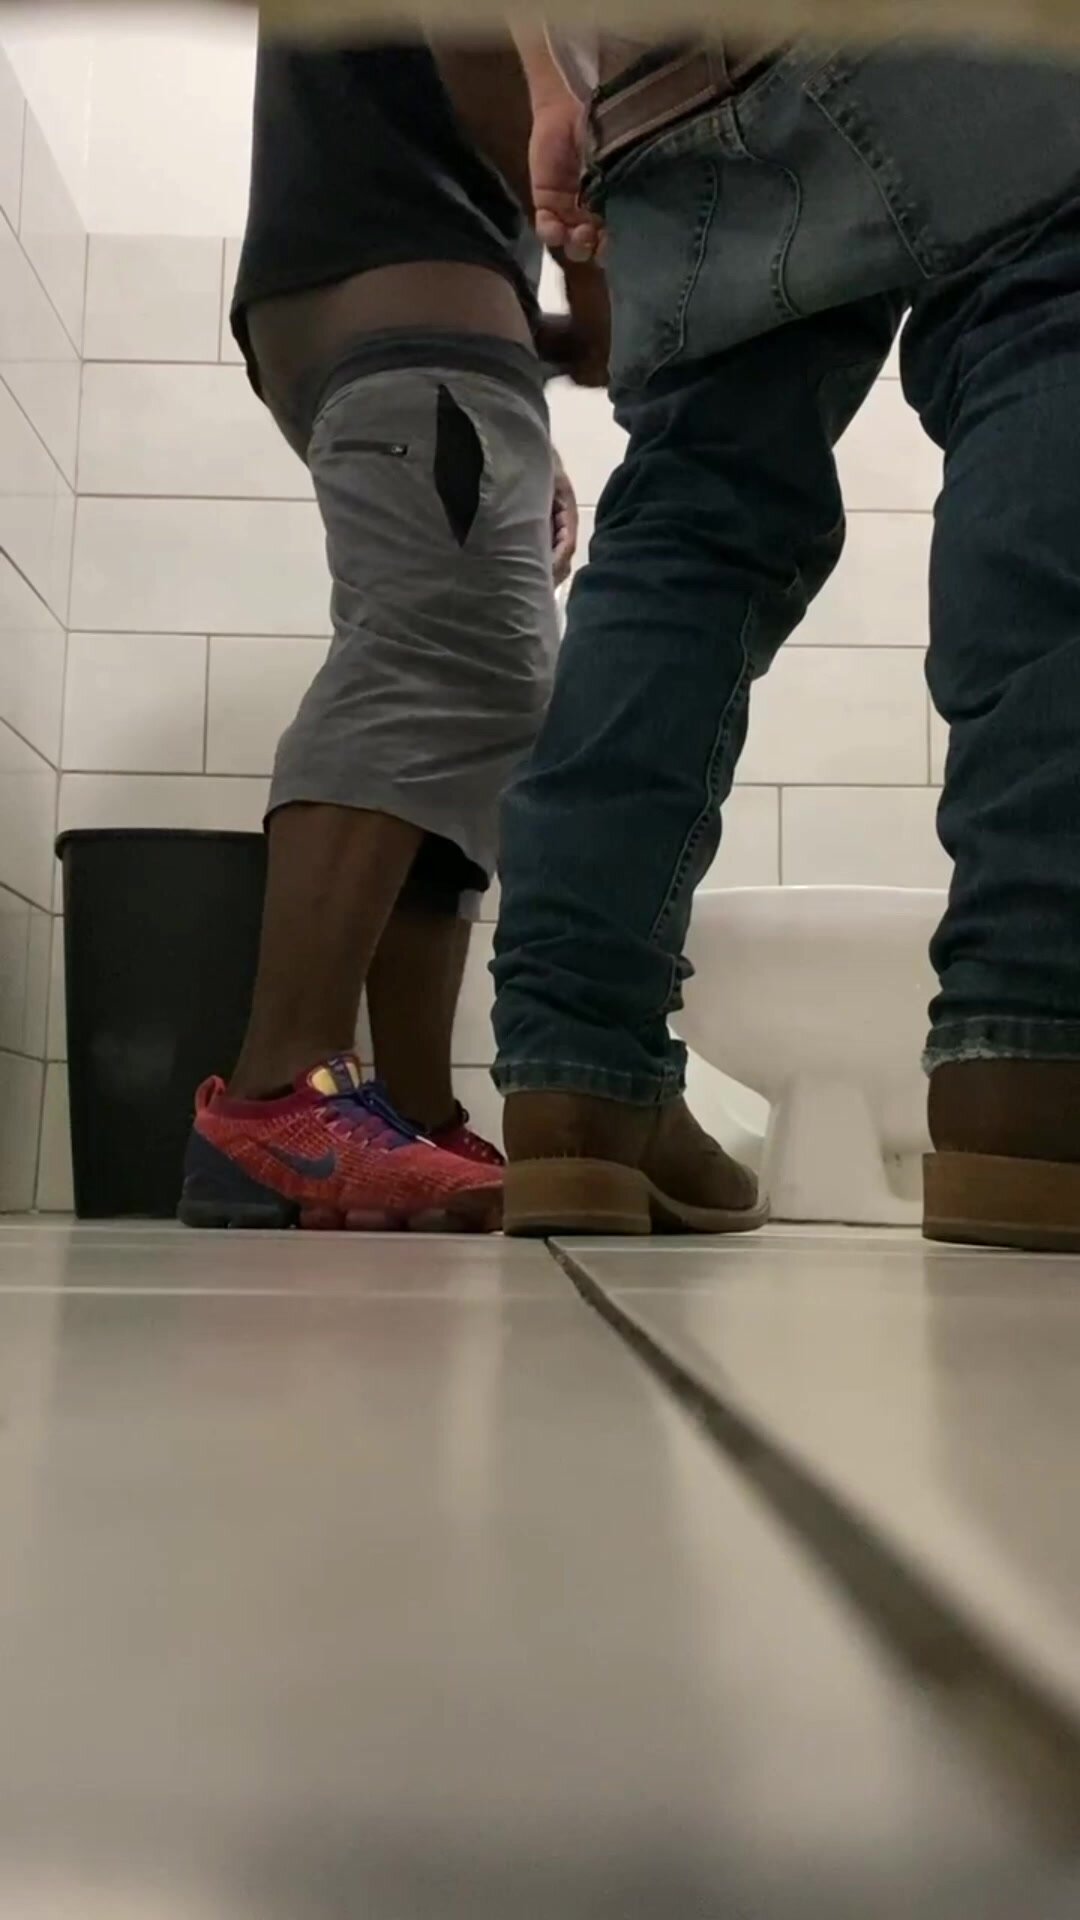 Caught two guys having fun in stall picture pic